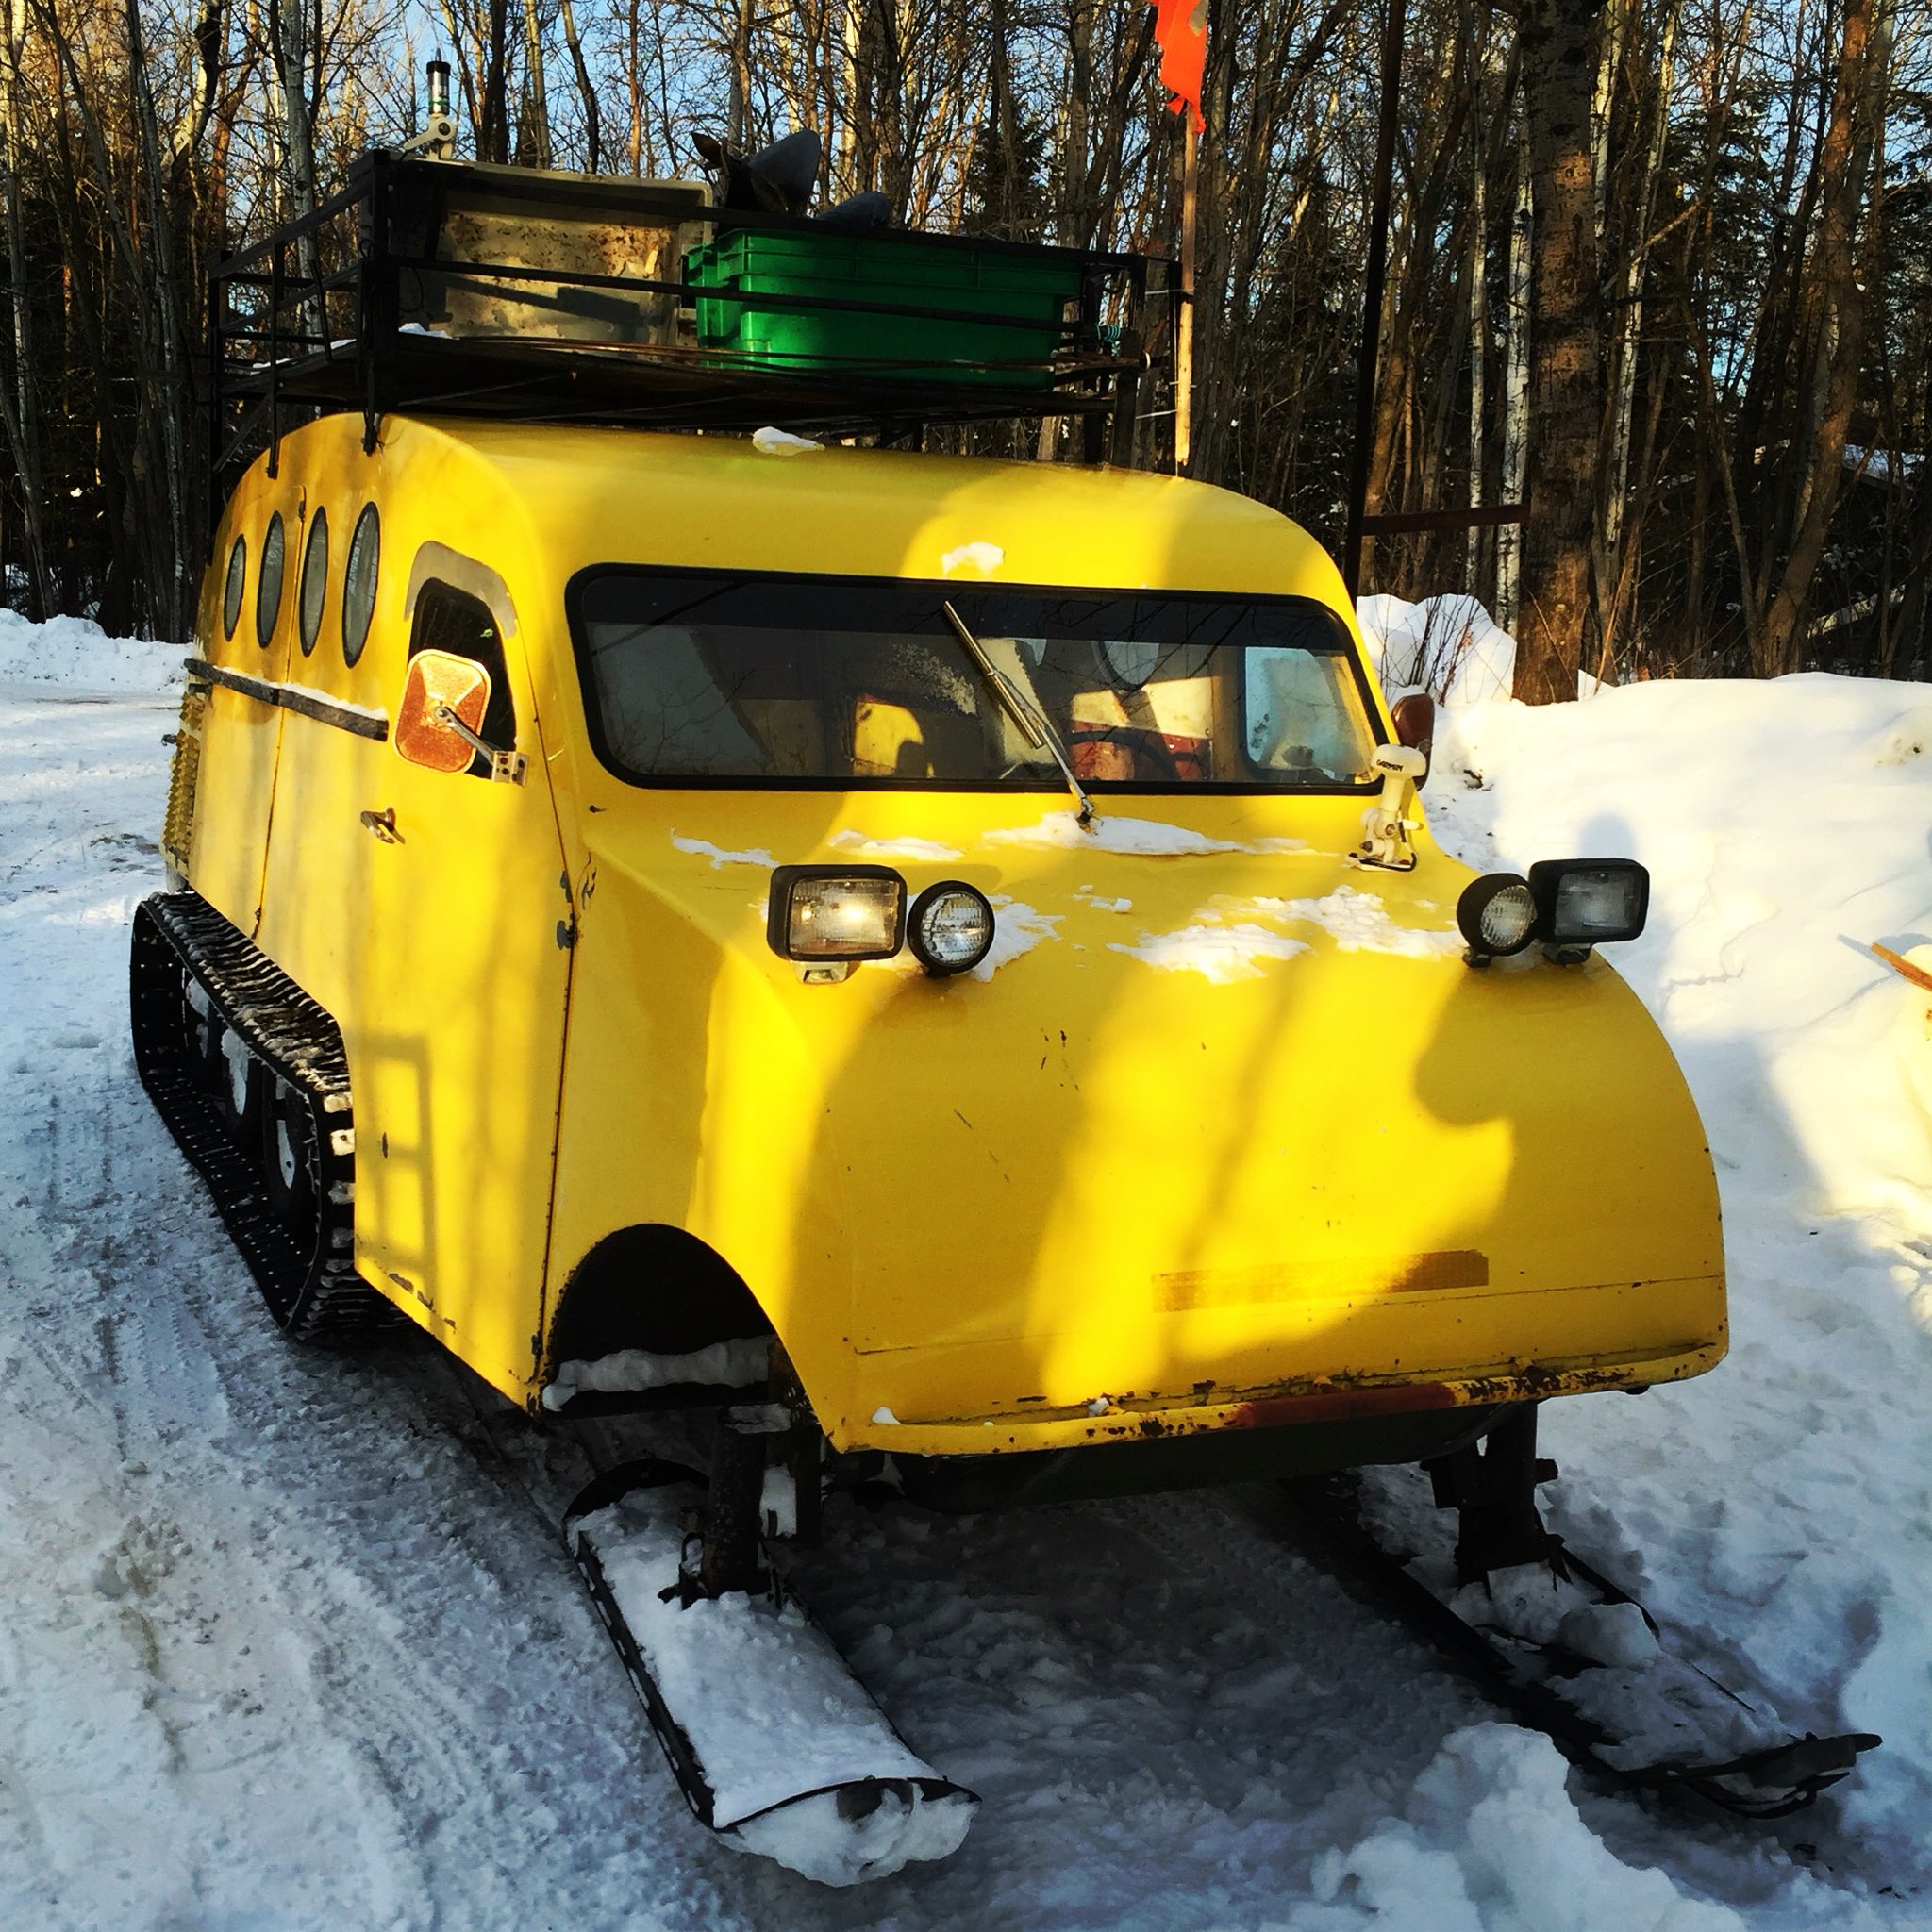 Das Stuff on X: Great Canadian rides! #Vintage ice fishing